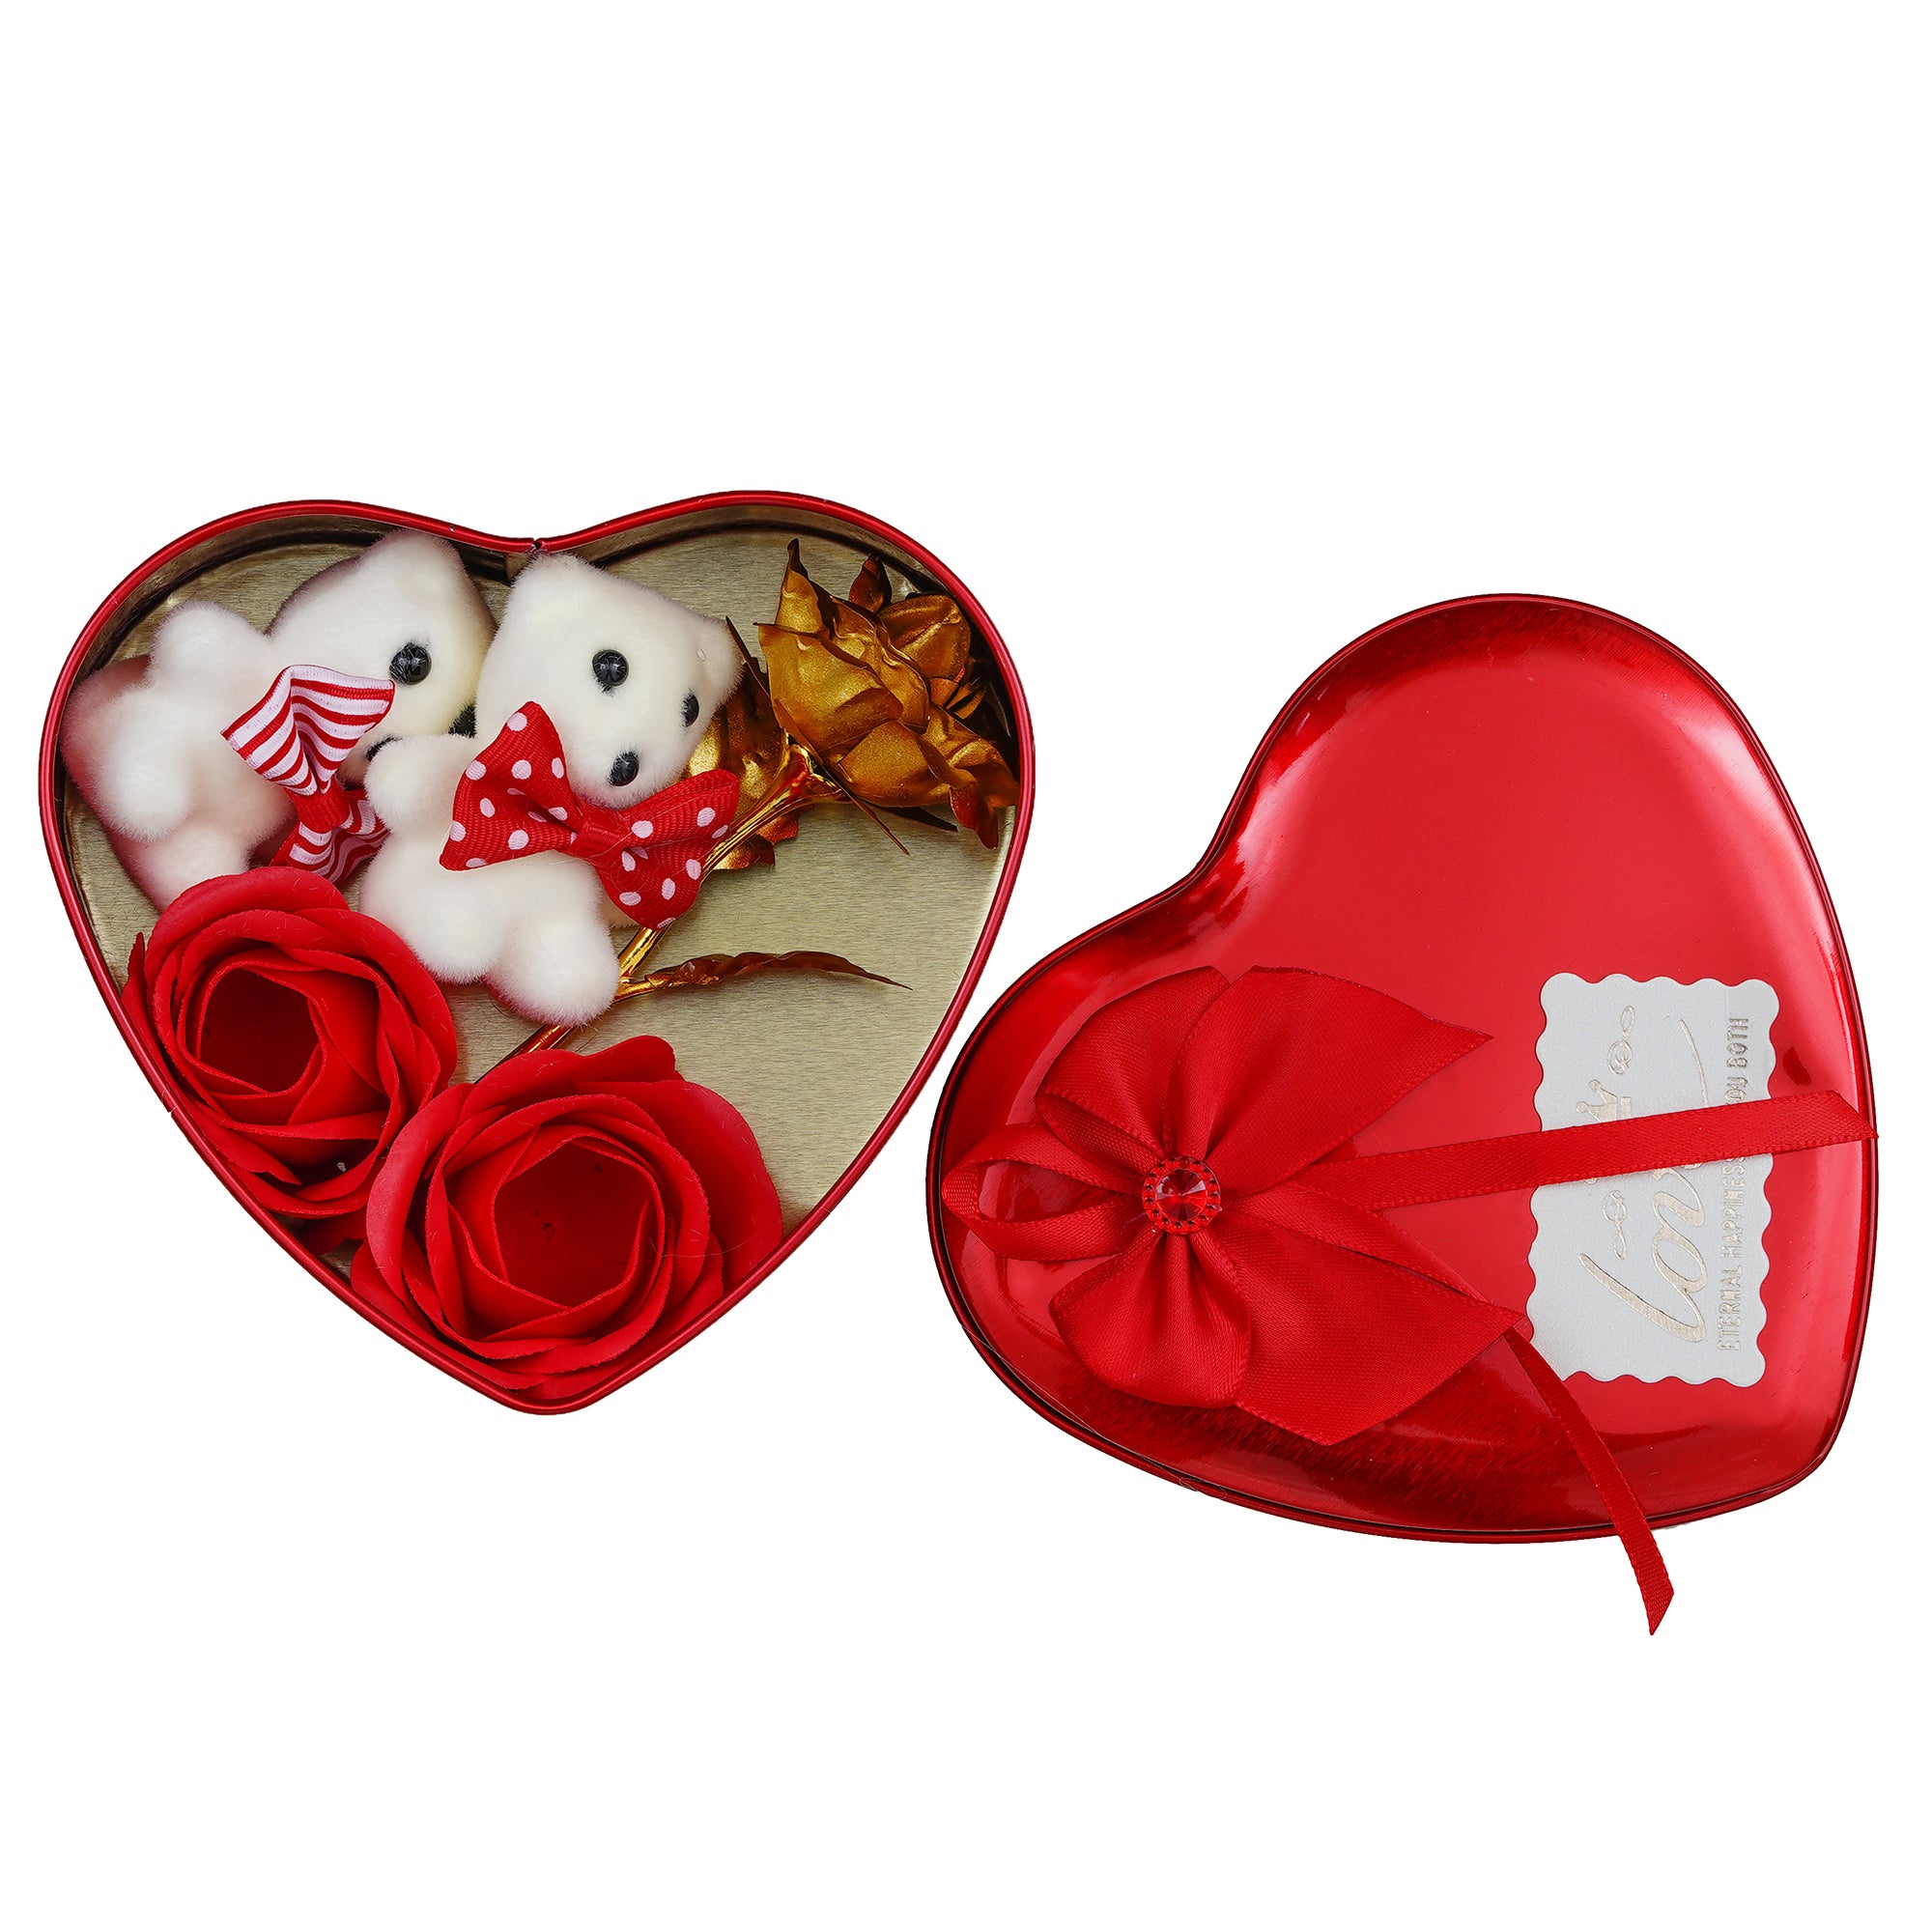 Red Heart Shaped Gift Box with 1 Golden Rose, 3 Red Roses, 1 Teddy Bear and a Card 2